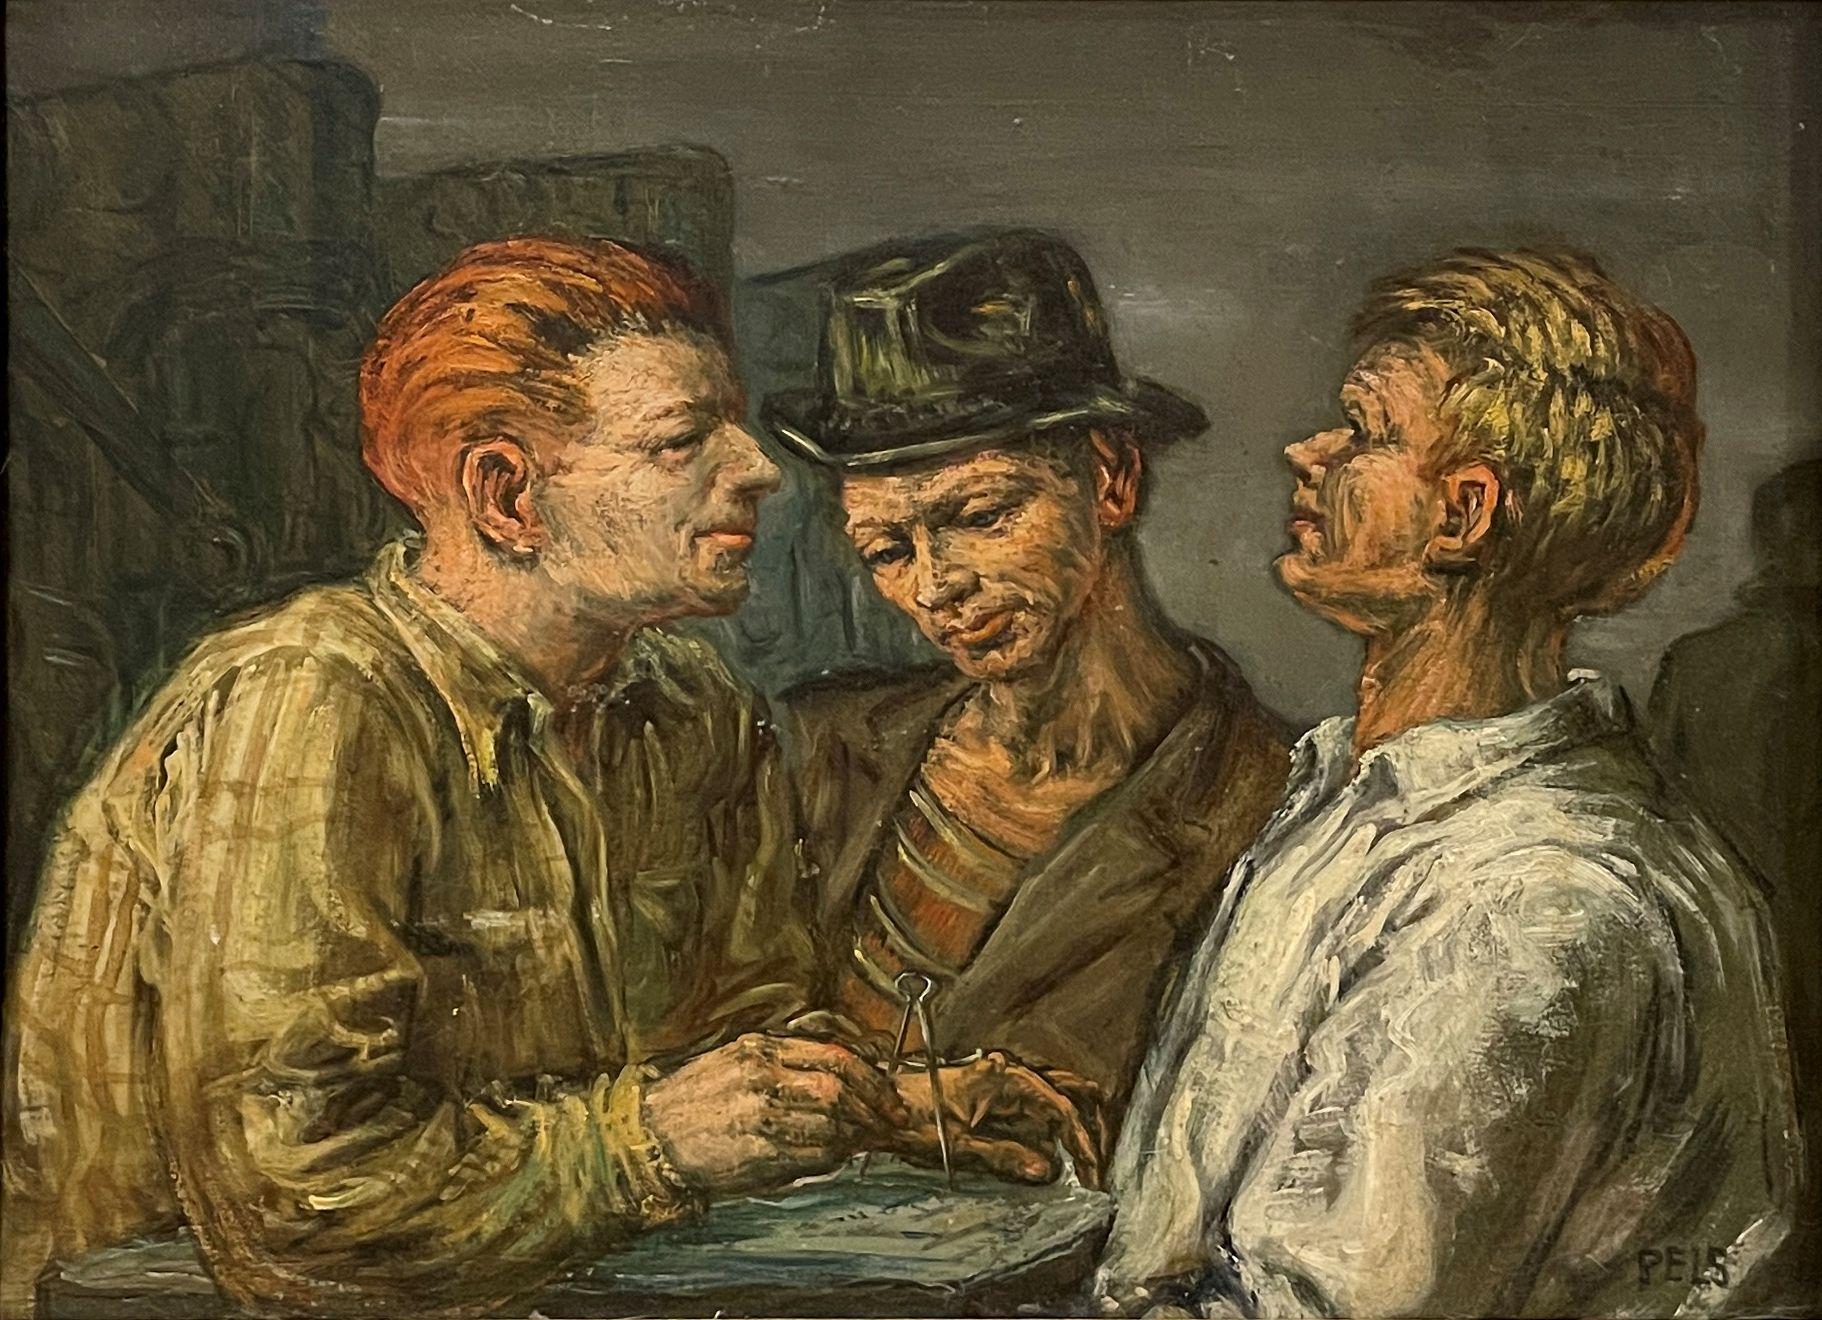 Albert Pels (1910 - 1998)
Three Engineers, circa 1935
Oil on board
10 x 13 1/2 inches
Signed lower right

Albert Pels was an art educator and painter of figures, genre scenes, urban and rural images, and illustration.  He also did murals and worked